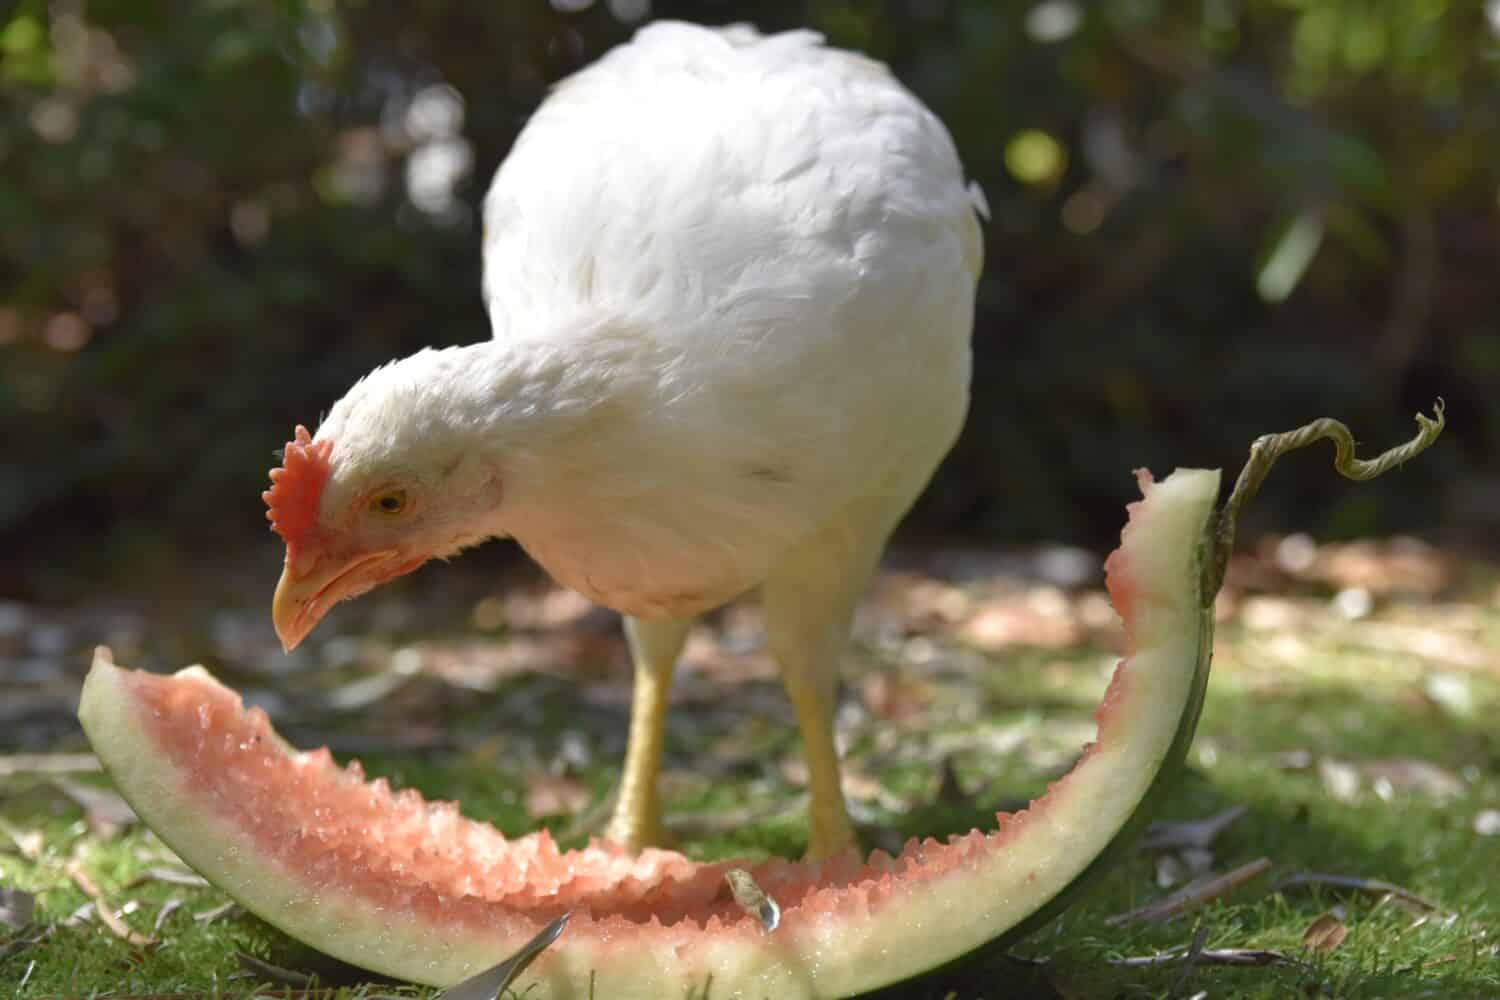 hungry white chicken eating watermelon in the garden 